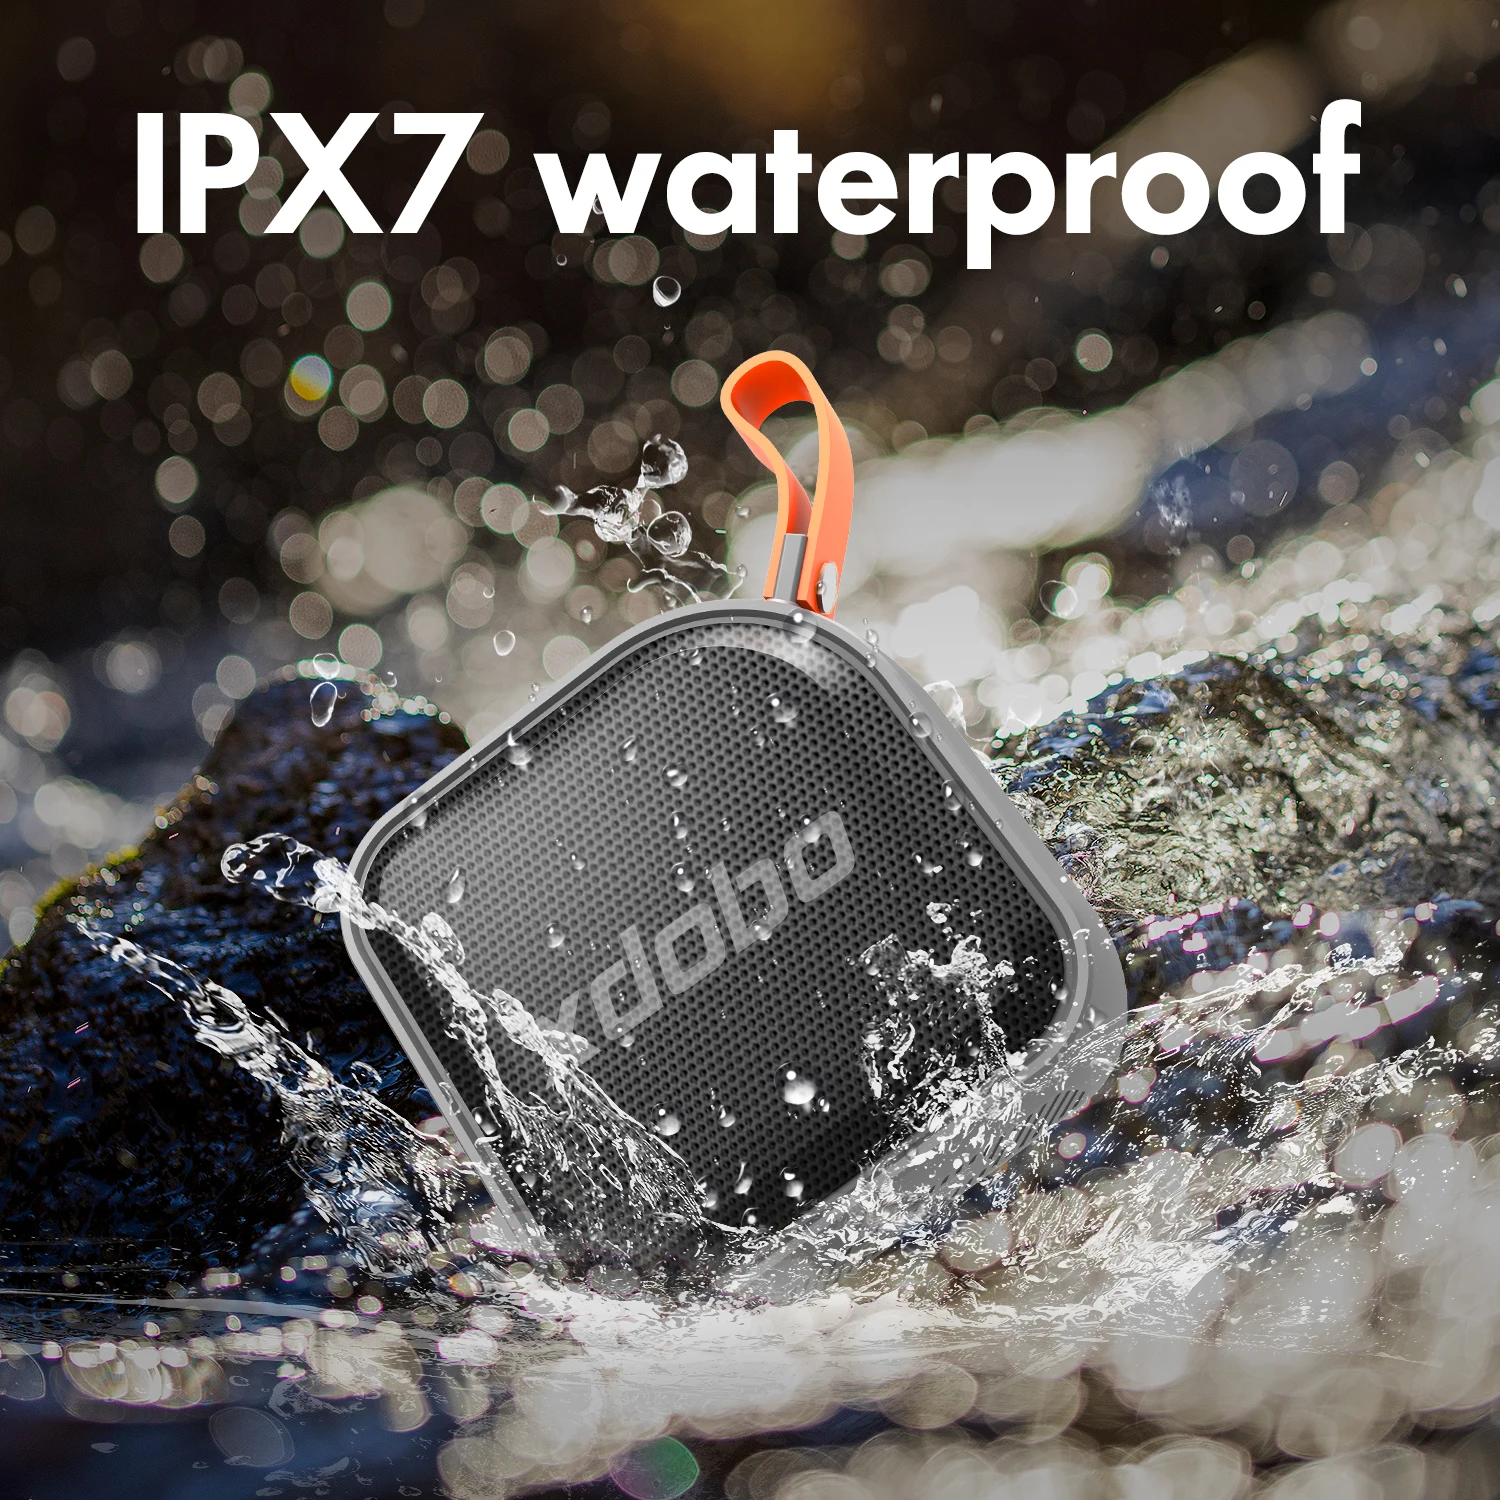 Xdobo Price 1995 Subwoofer Powerful Portable Waterproof Smart Bluetooth Speaker Small Mini Square Music Box Support USB TF-Card |